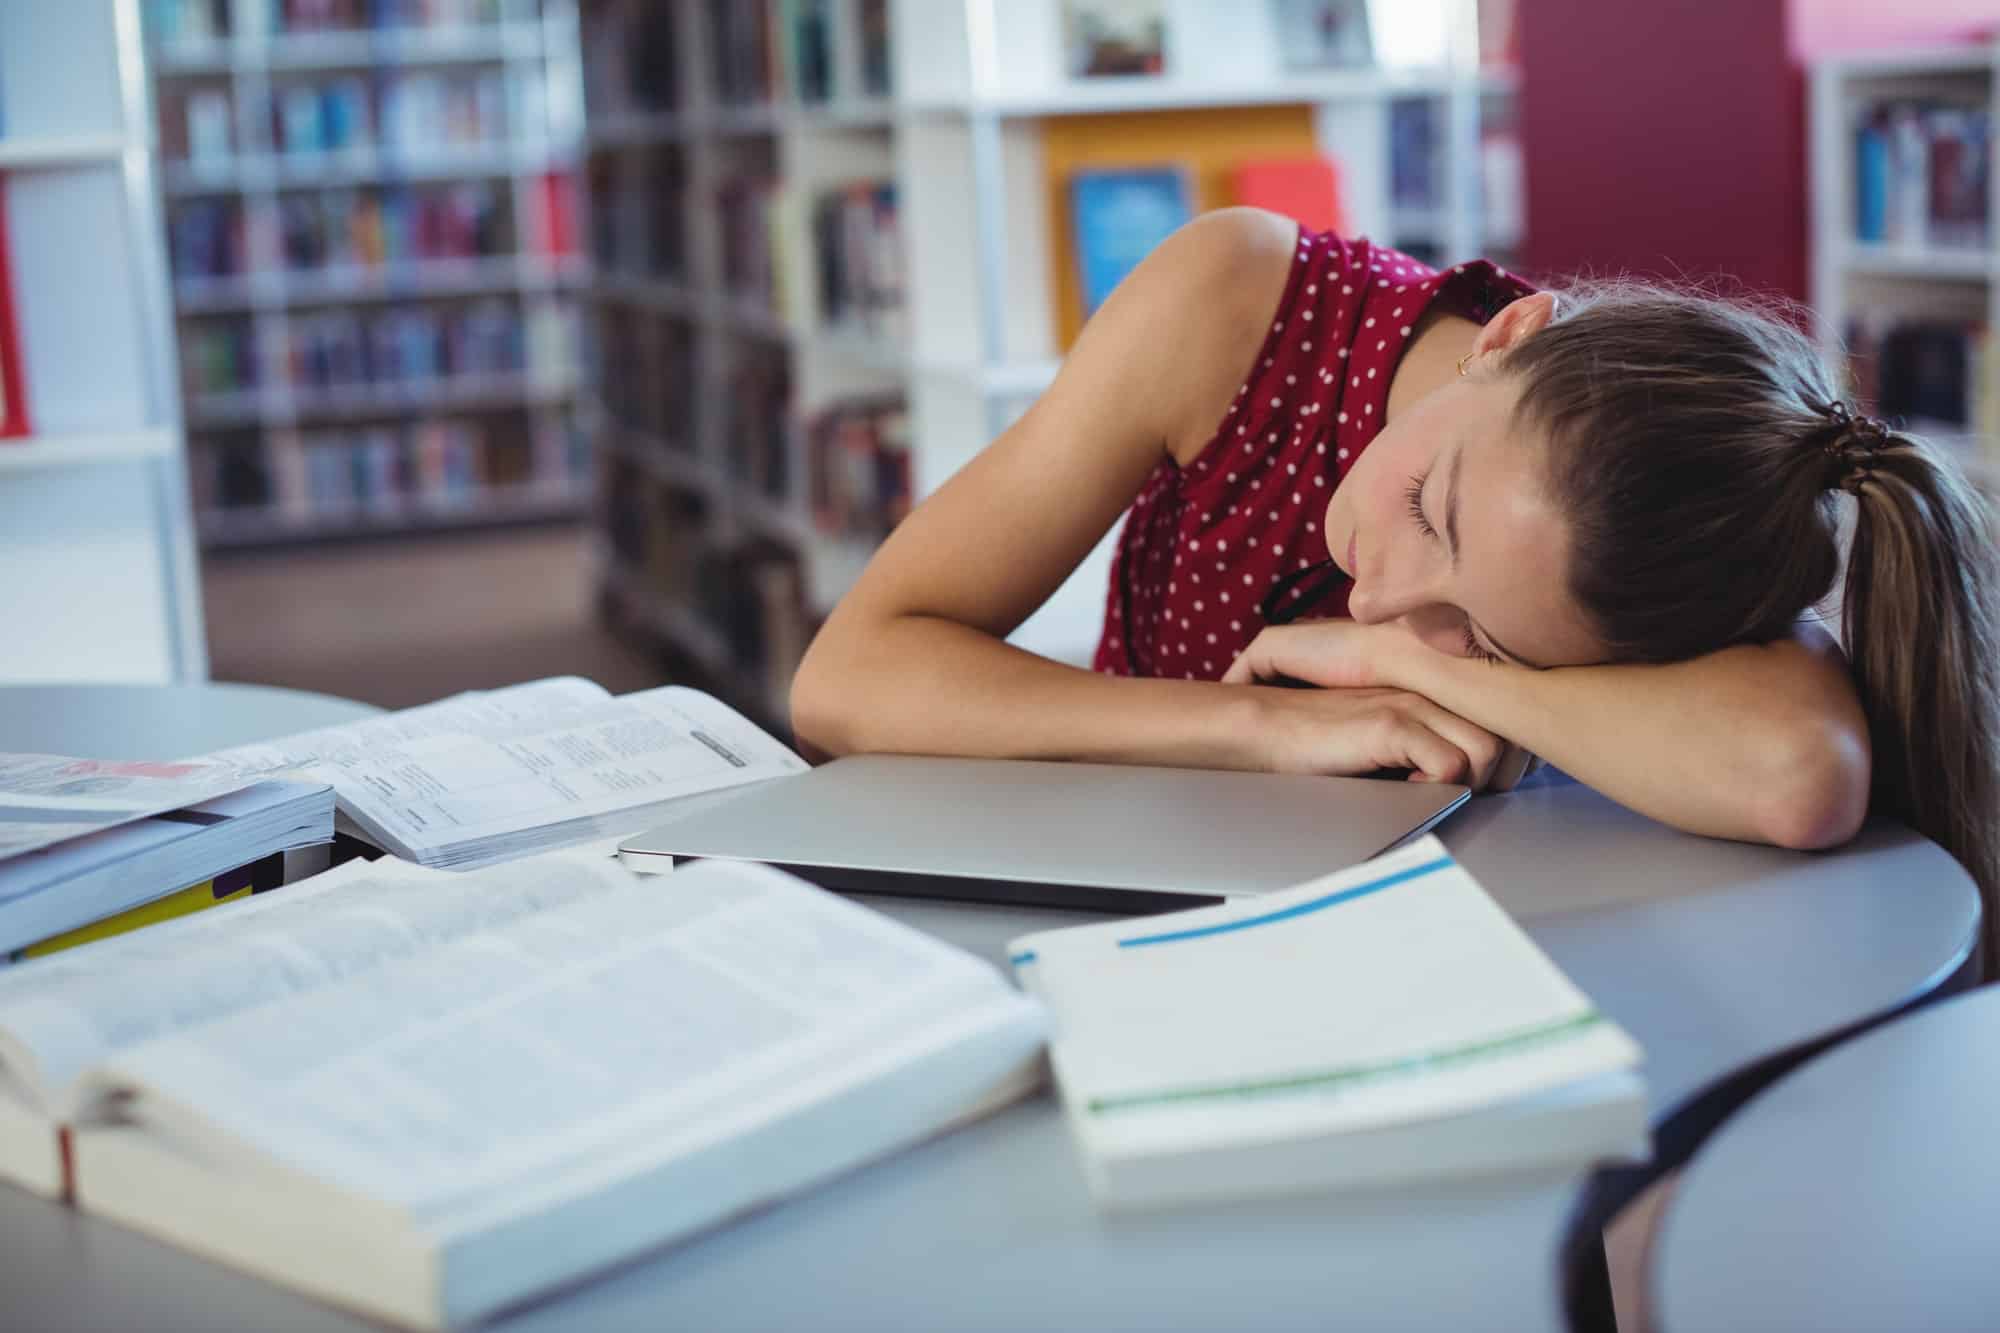 Tired schoolgirl sleeping while studying in library